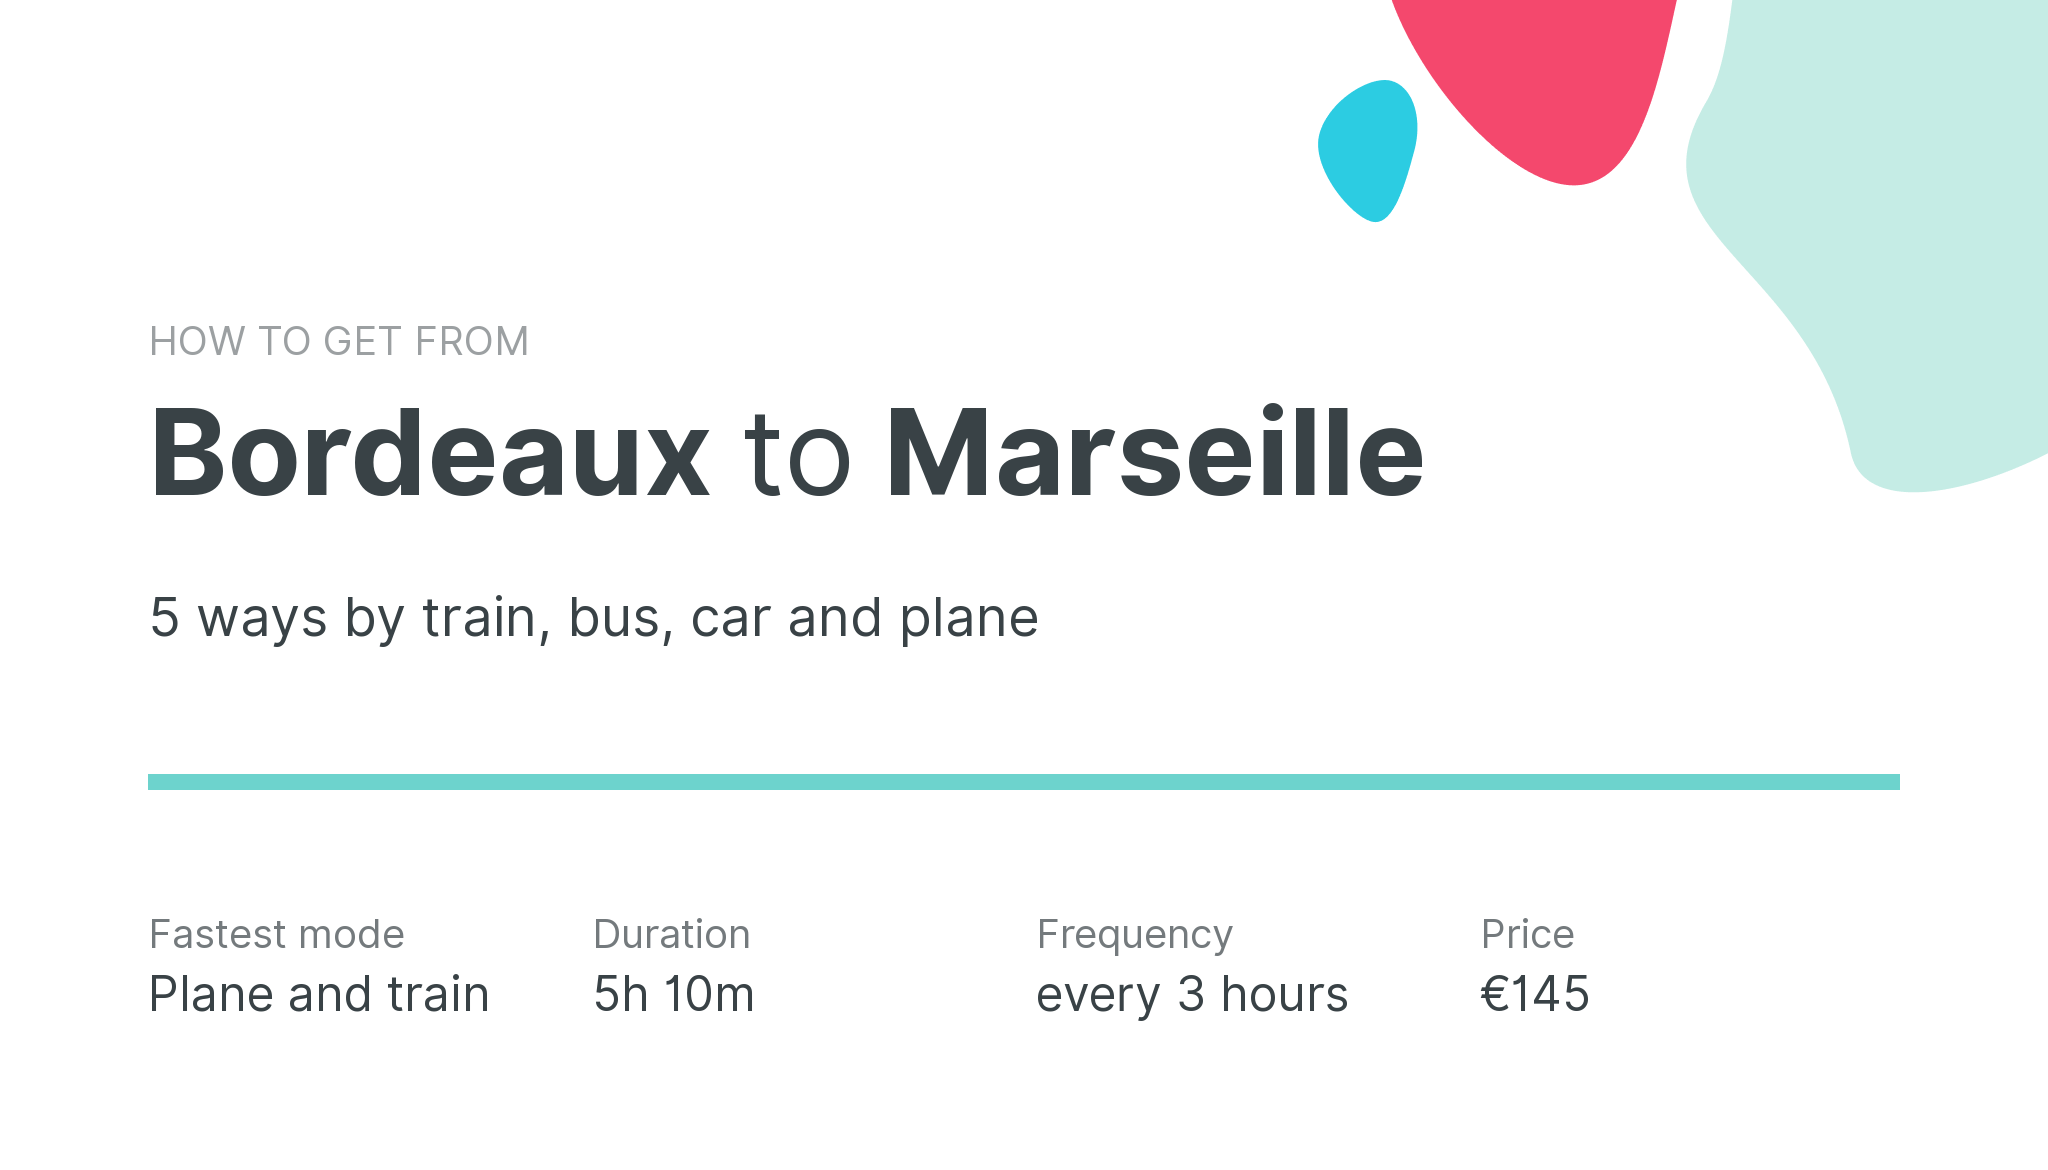 How do I get from Bordeaux to Marseille